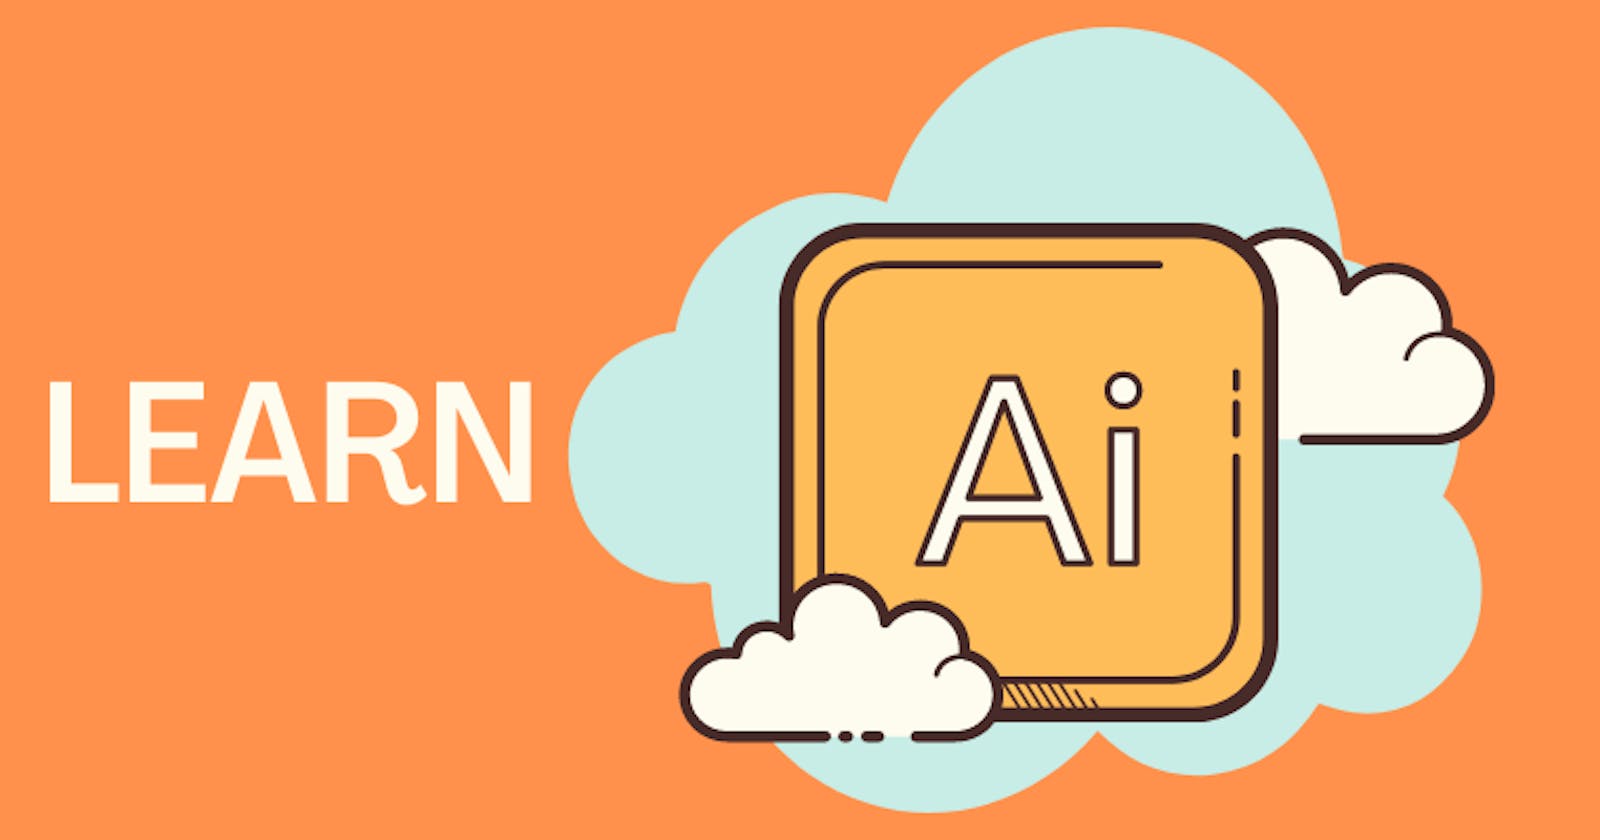 What is Adobe Illustrator and How to start learning it effectively?